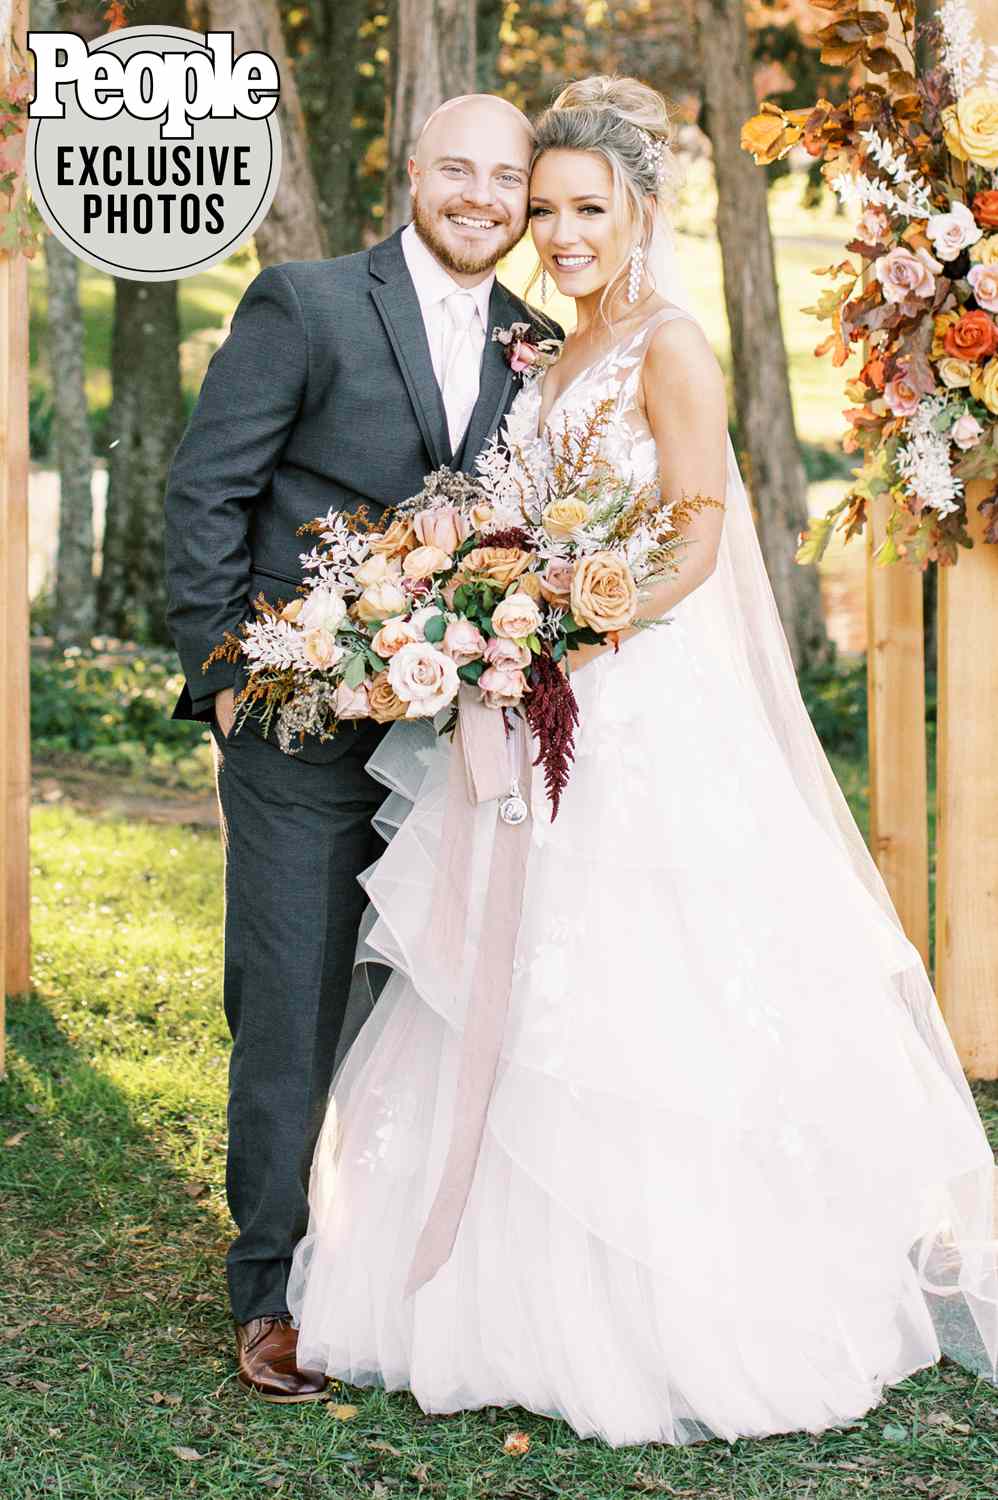 <p>The Voice alum Emily Ann Roberts and high school sweetheart Chris Sasser are married! PEOPLE exclusively confirmed that after five years of dating, the pair wed in an afternoon service on the picturesque grounds of Marblegate Farm in Friendsville, Tennessee. </p>
                            <p>The couple got engaged in October 2019 on the occasion of Roberts' 21st birthday. </p>
                            <p>"A piece of advice we're taking into our marriage with us is to always talk things out," Roberts told PEOPLE. "We've both learned in every other relationship in our lives how important honesty and communication is. We know it is even more important to always be on the same page to make a marriage work."</p>
                            